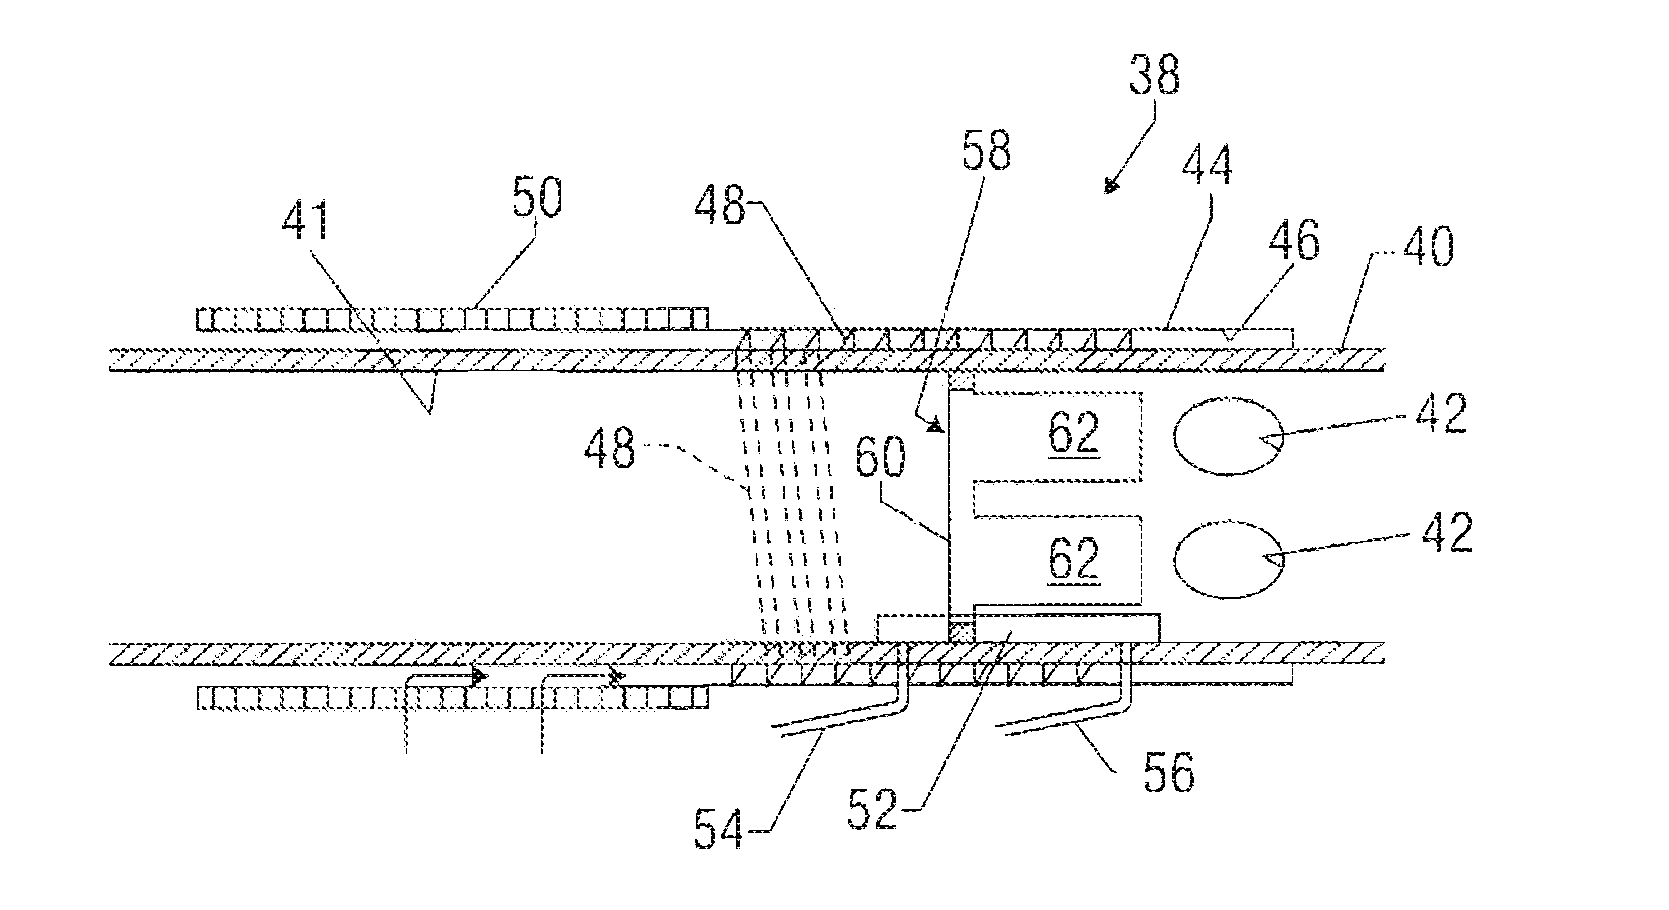 Downhole Inflow Control Device with Shut-Off Feature